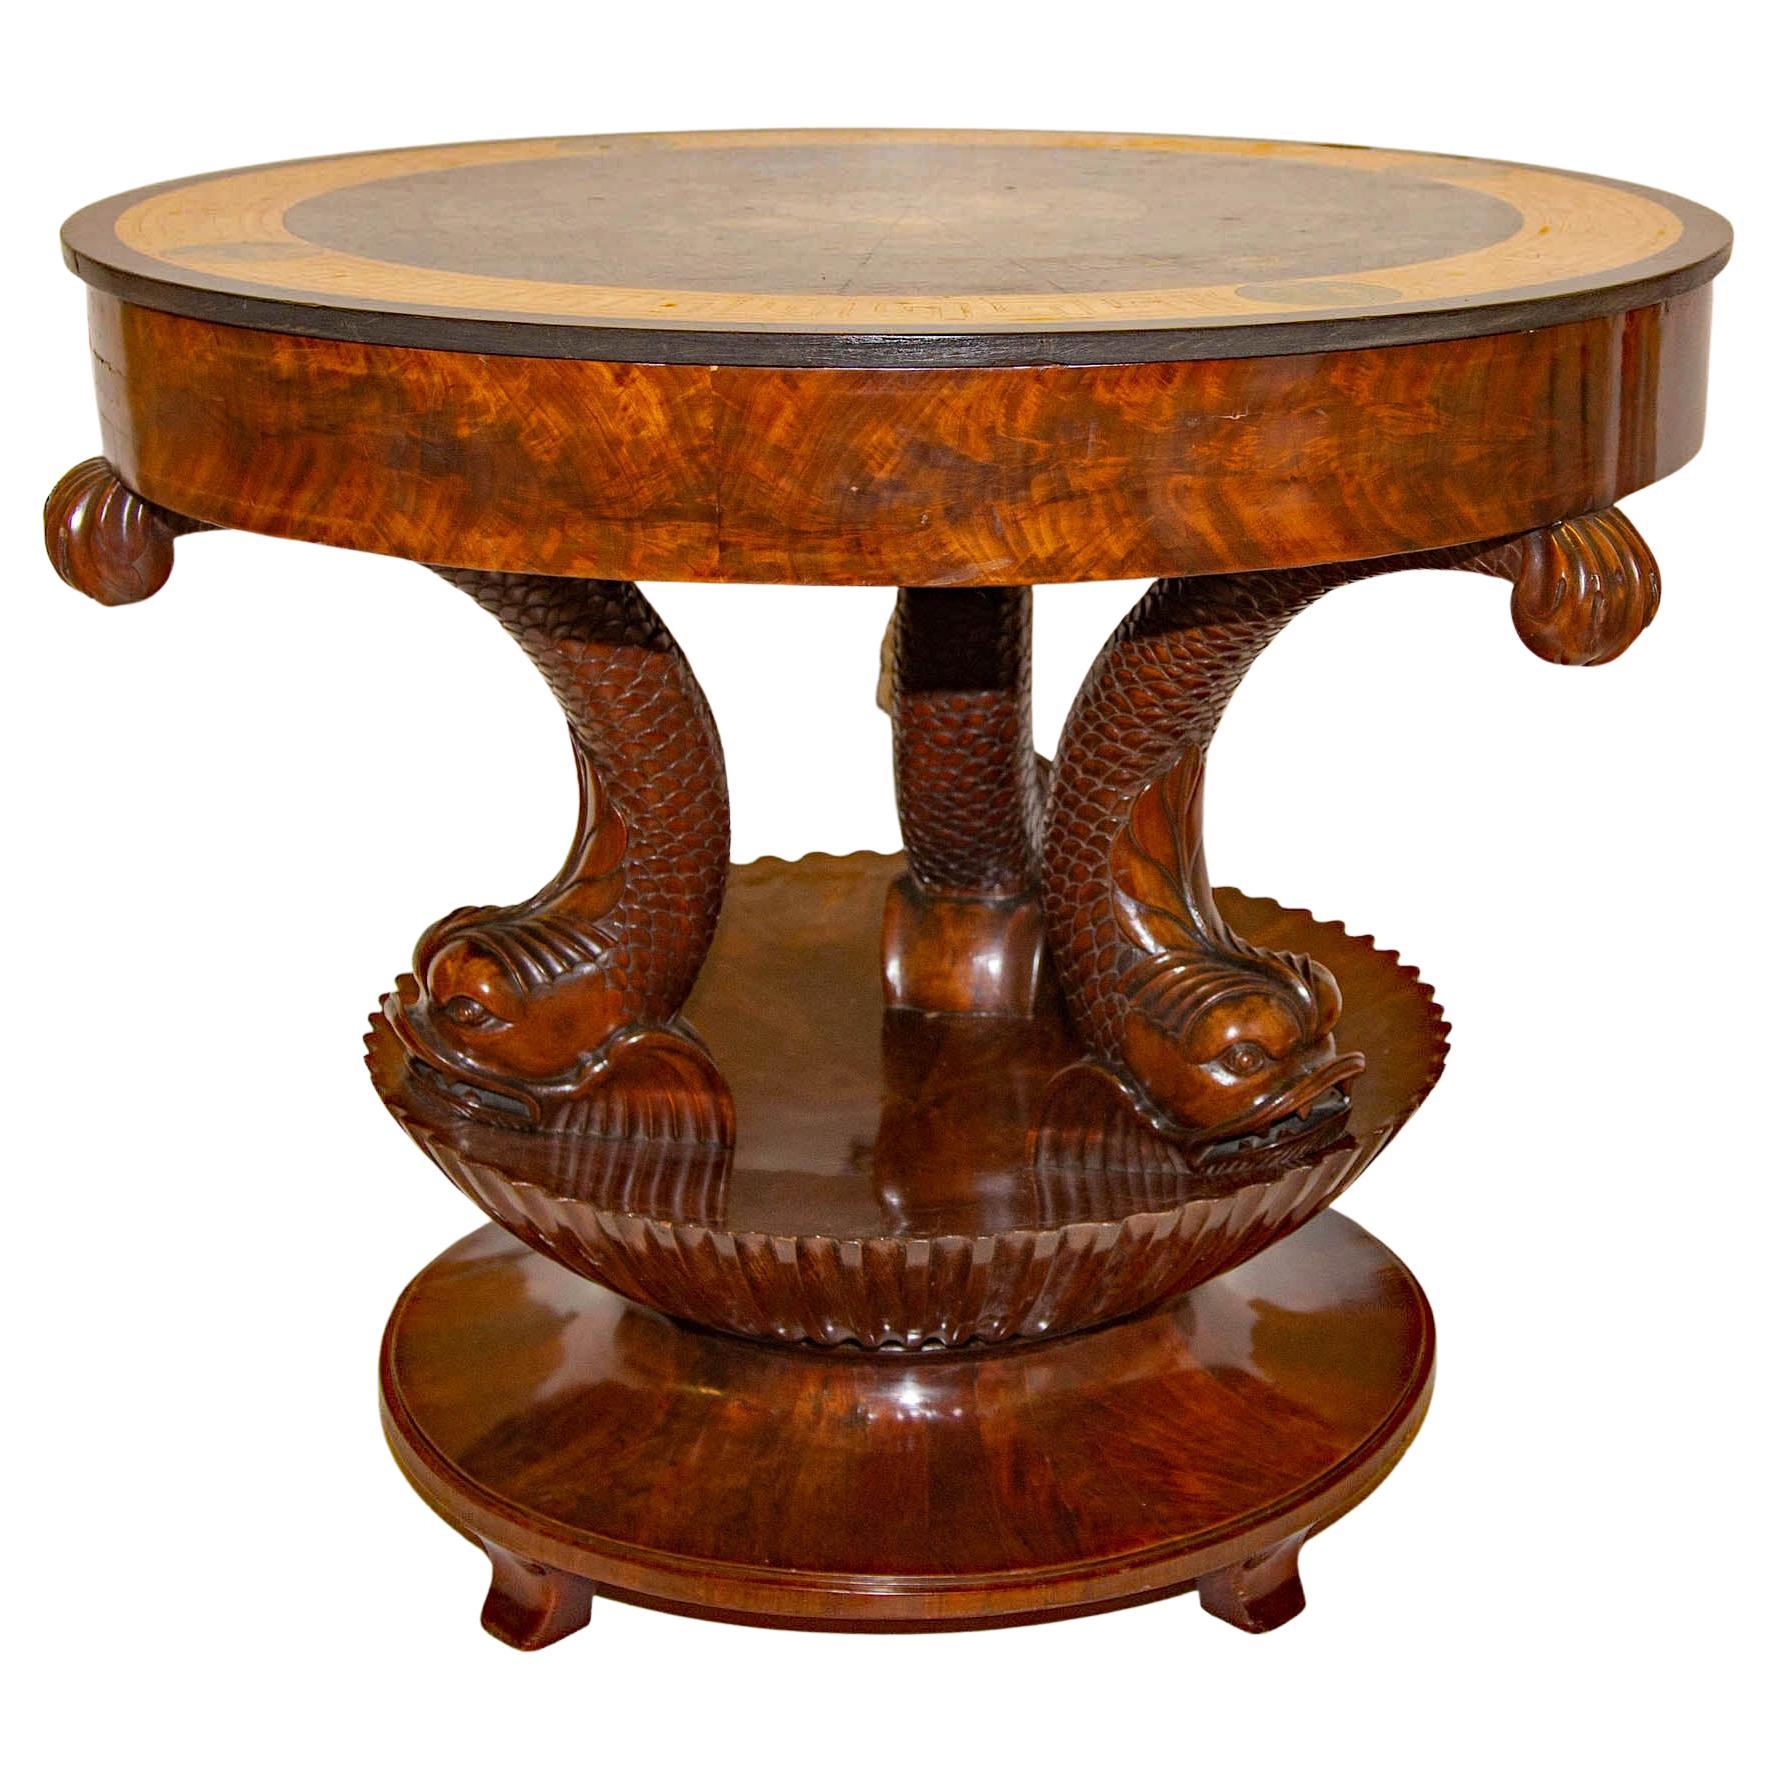 This Italian neoclassical center table is an absolute beauty. The scaglioa top is decorated with an abstract view of the heavens with rich blue colors. The base with carved dolphins rising from a shell form support. Made of fine Honduran crotch